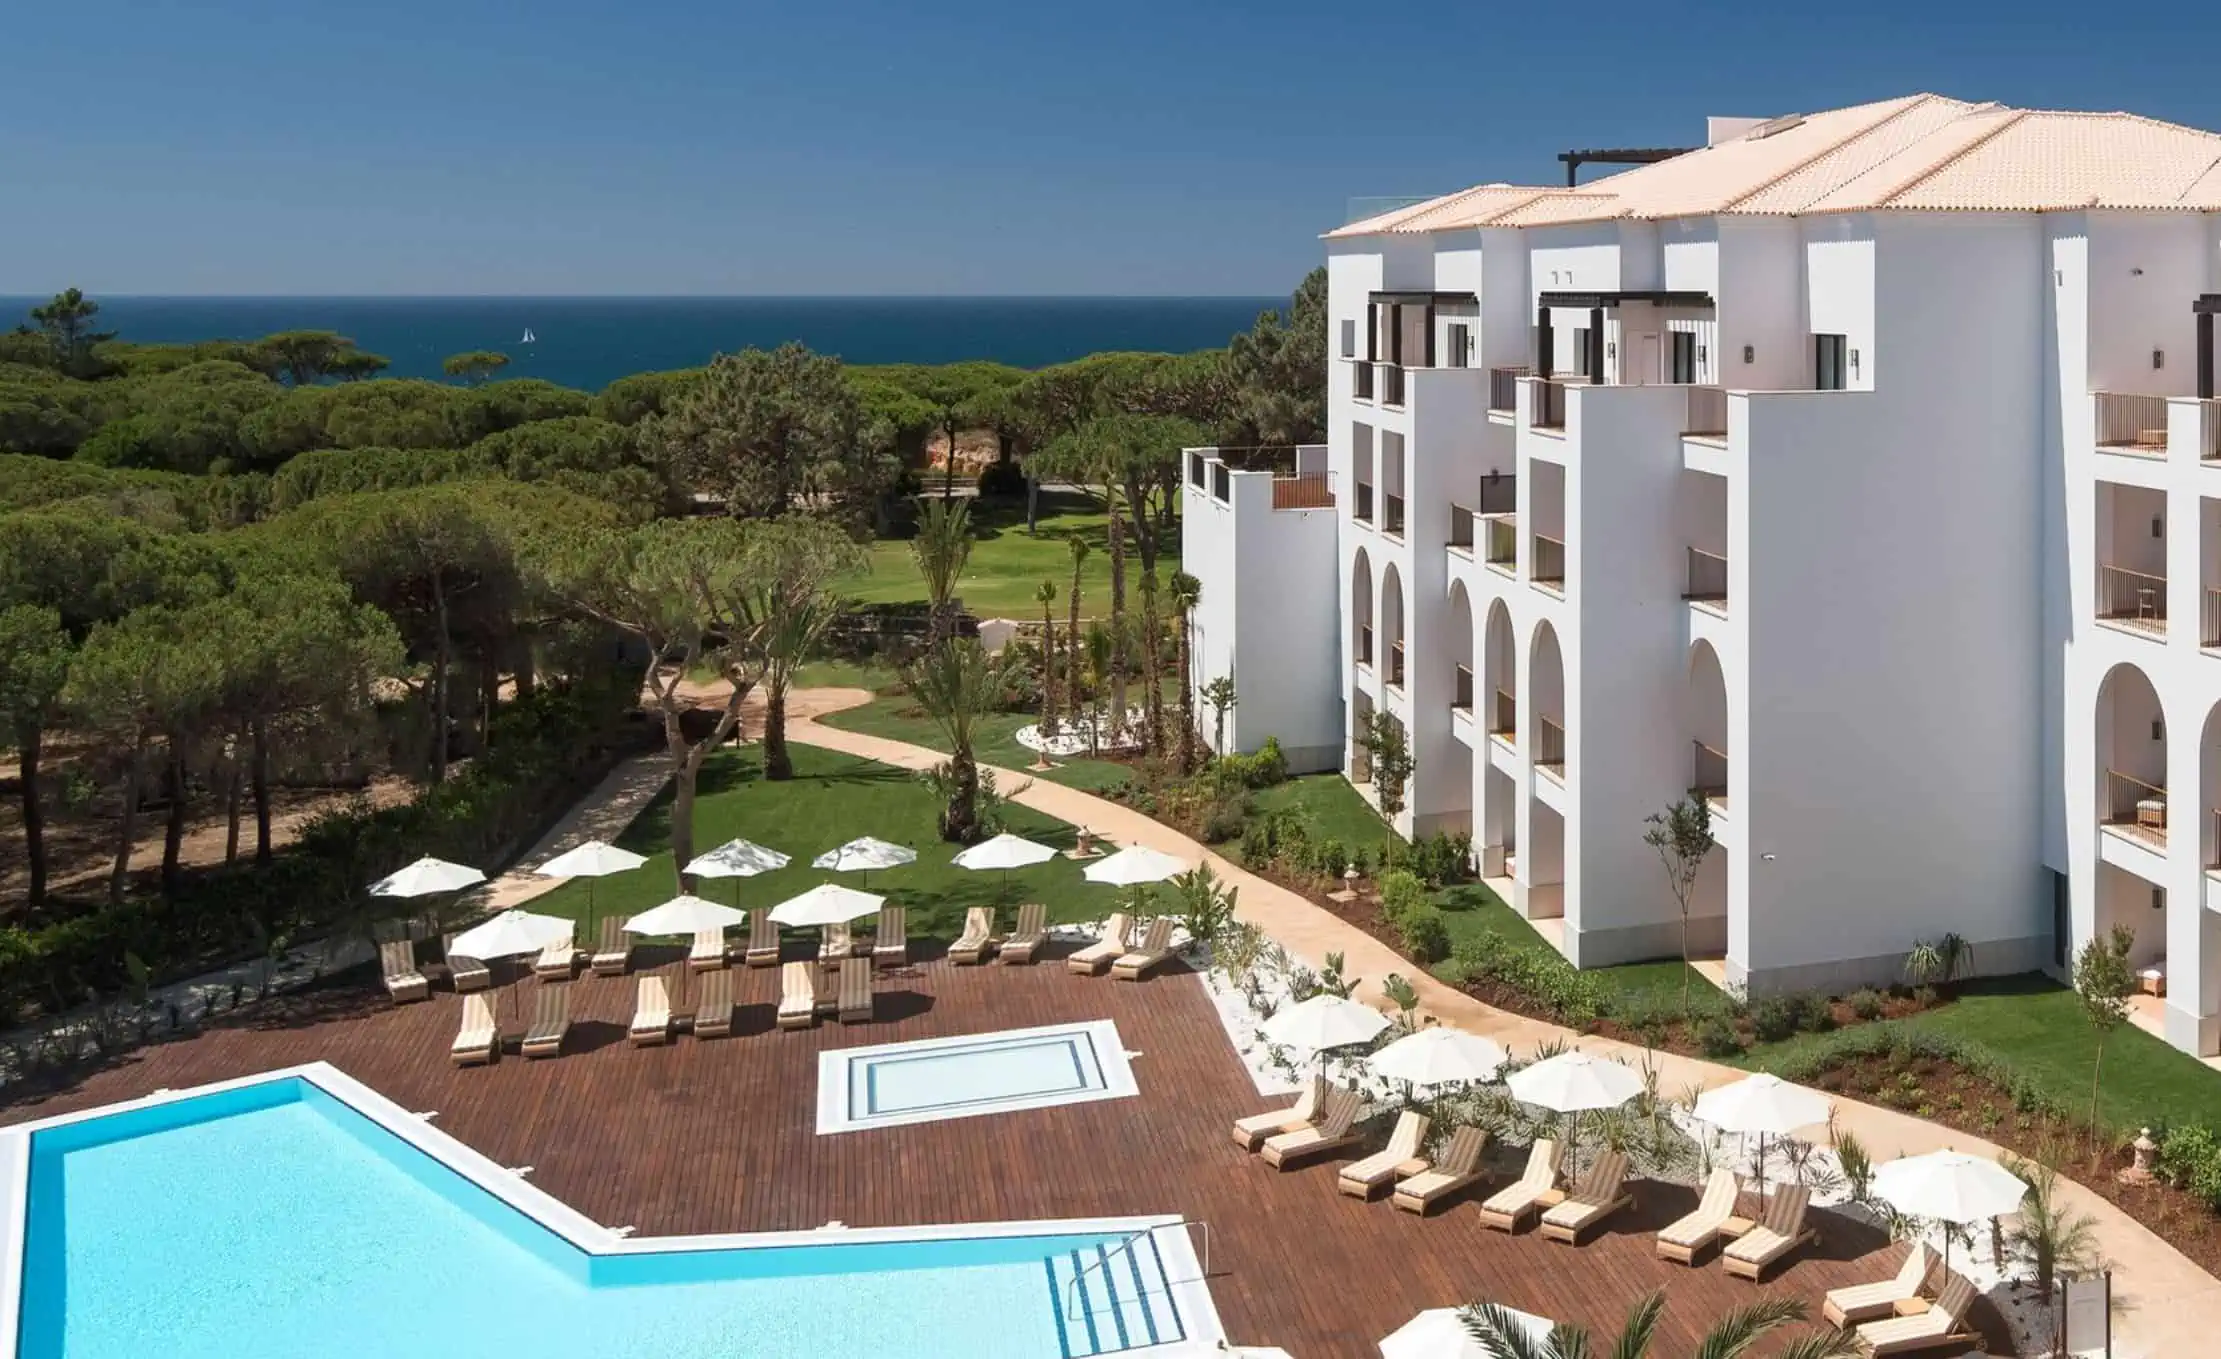 Pine Cliffs Resort - Top Portugal Resorts and Best Places to Stay in Portugal